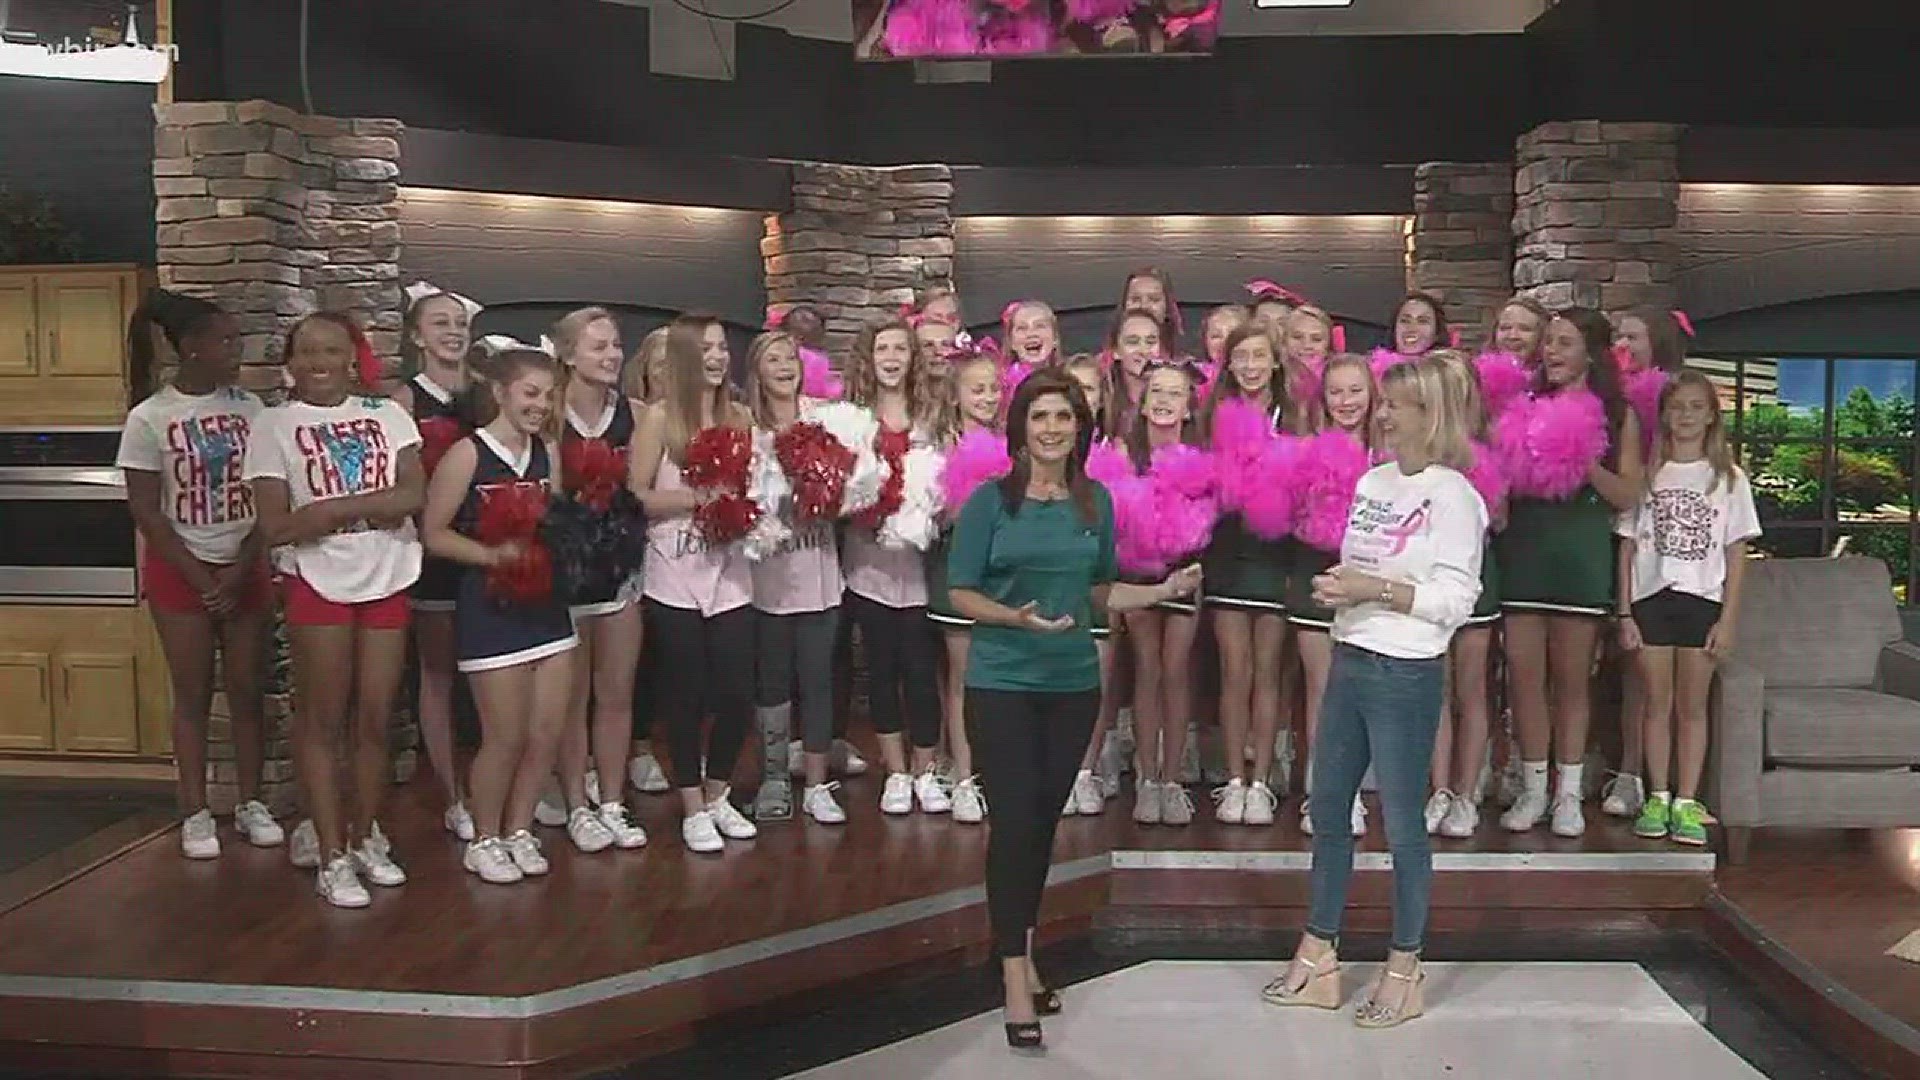 Amy Dunaway from Komen talks about upcoming race and local cheerleaders out on race route.